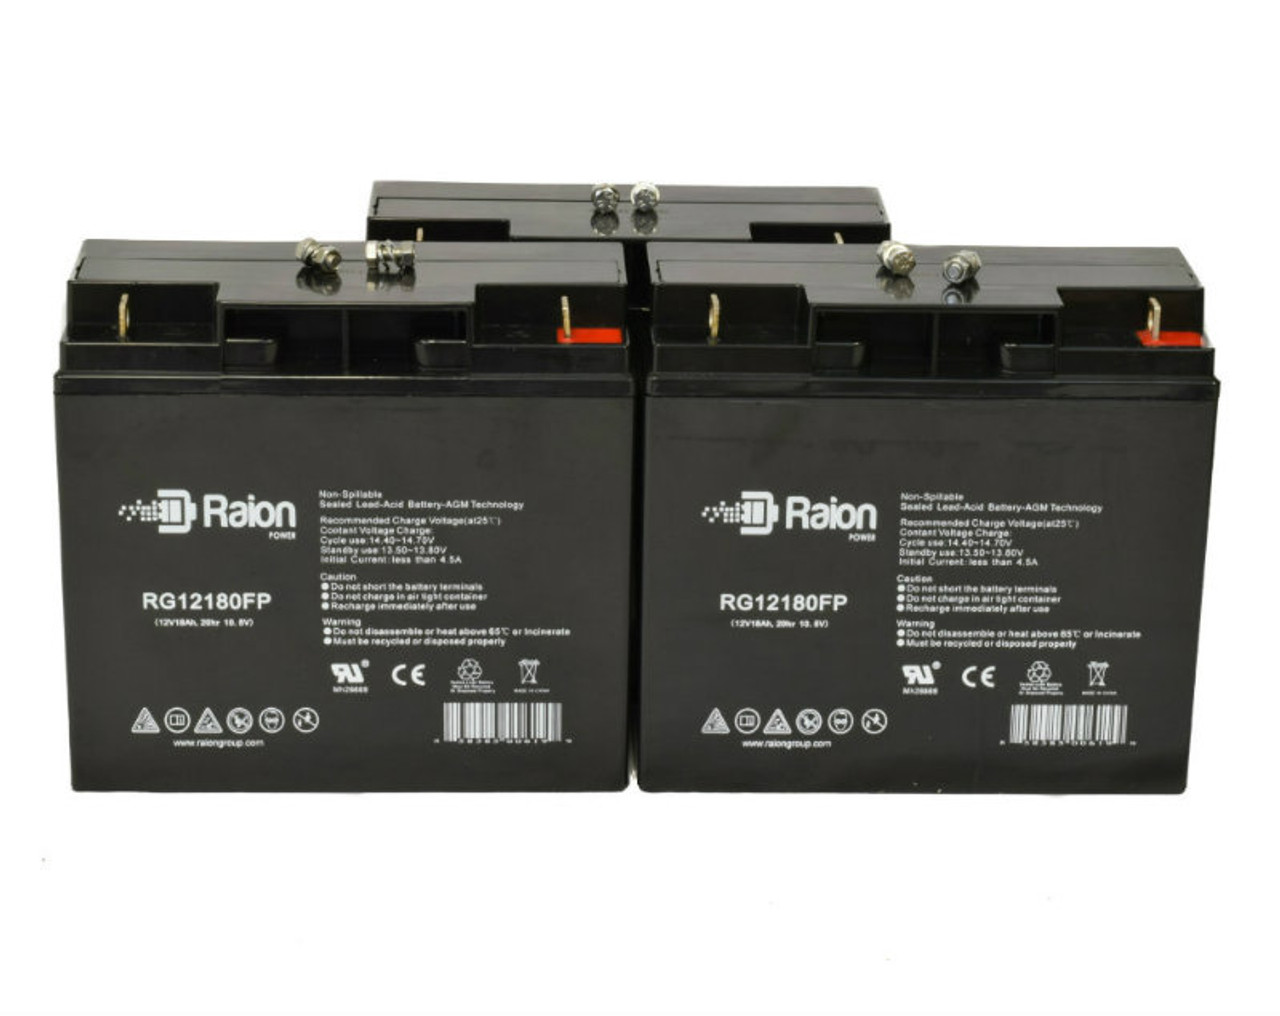 Raion Power Replacement 12V 18Ah Battery for Sealake UM1217 - 3 Pack